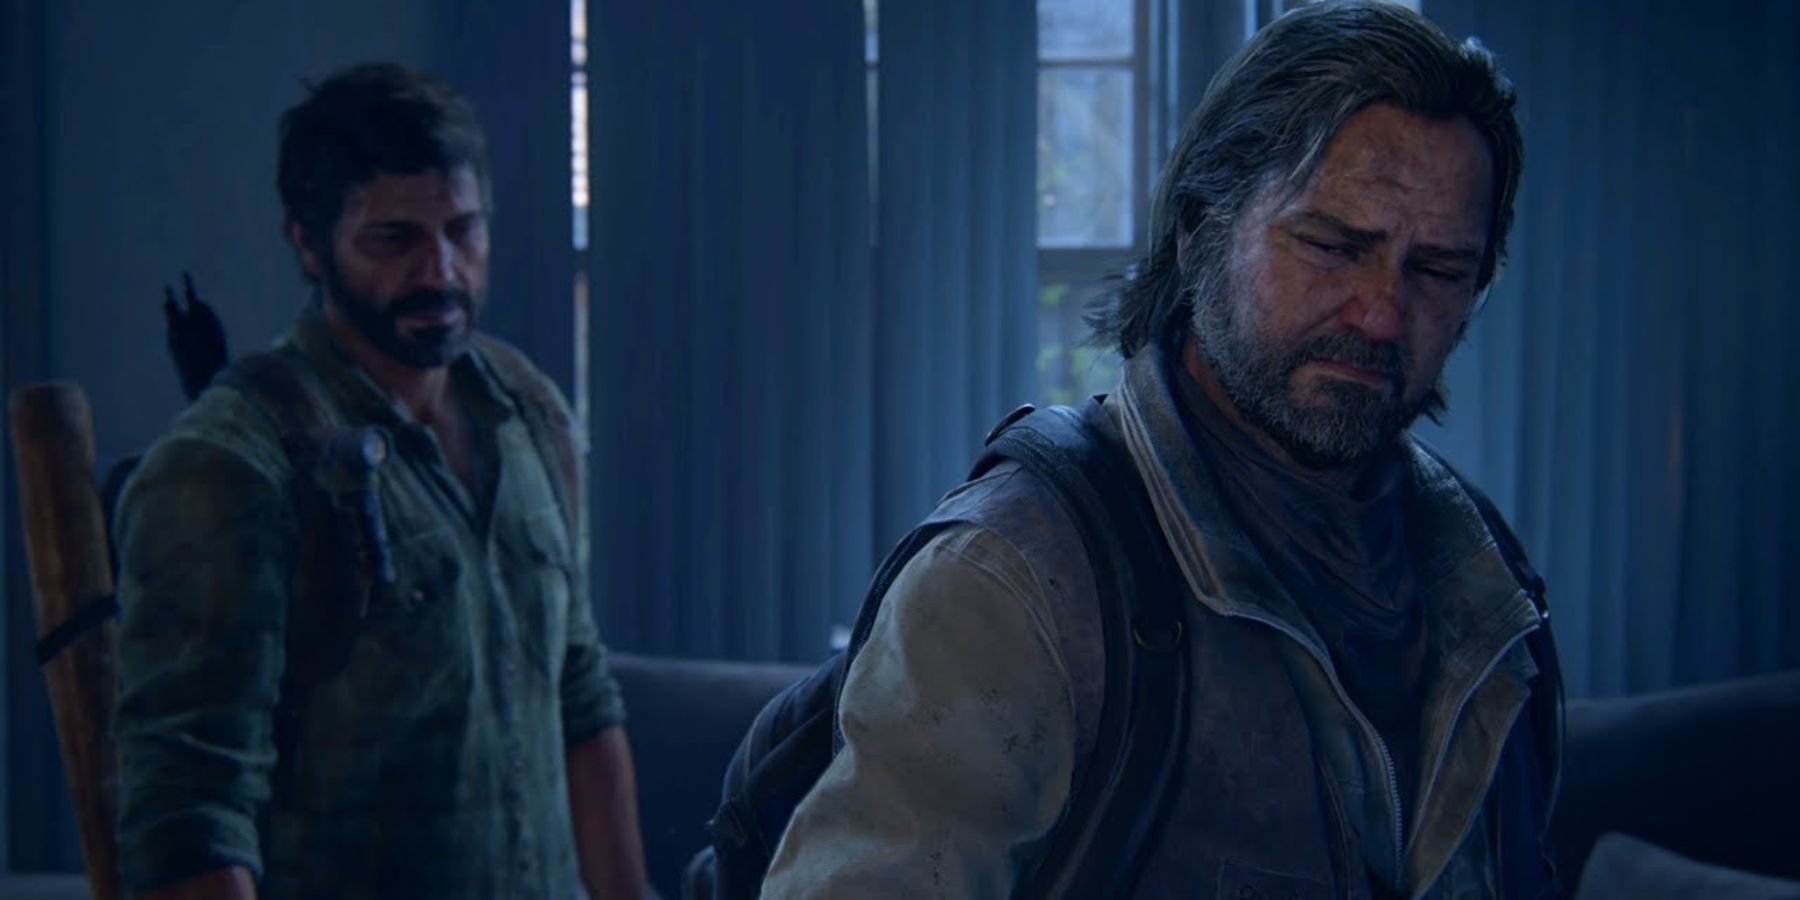 The Last Of Us episode 3 cast: Introducing Bill and Frank